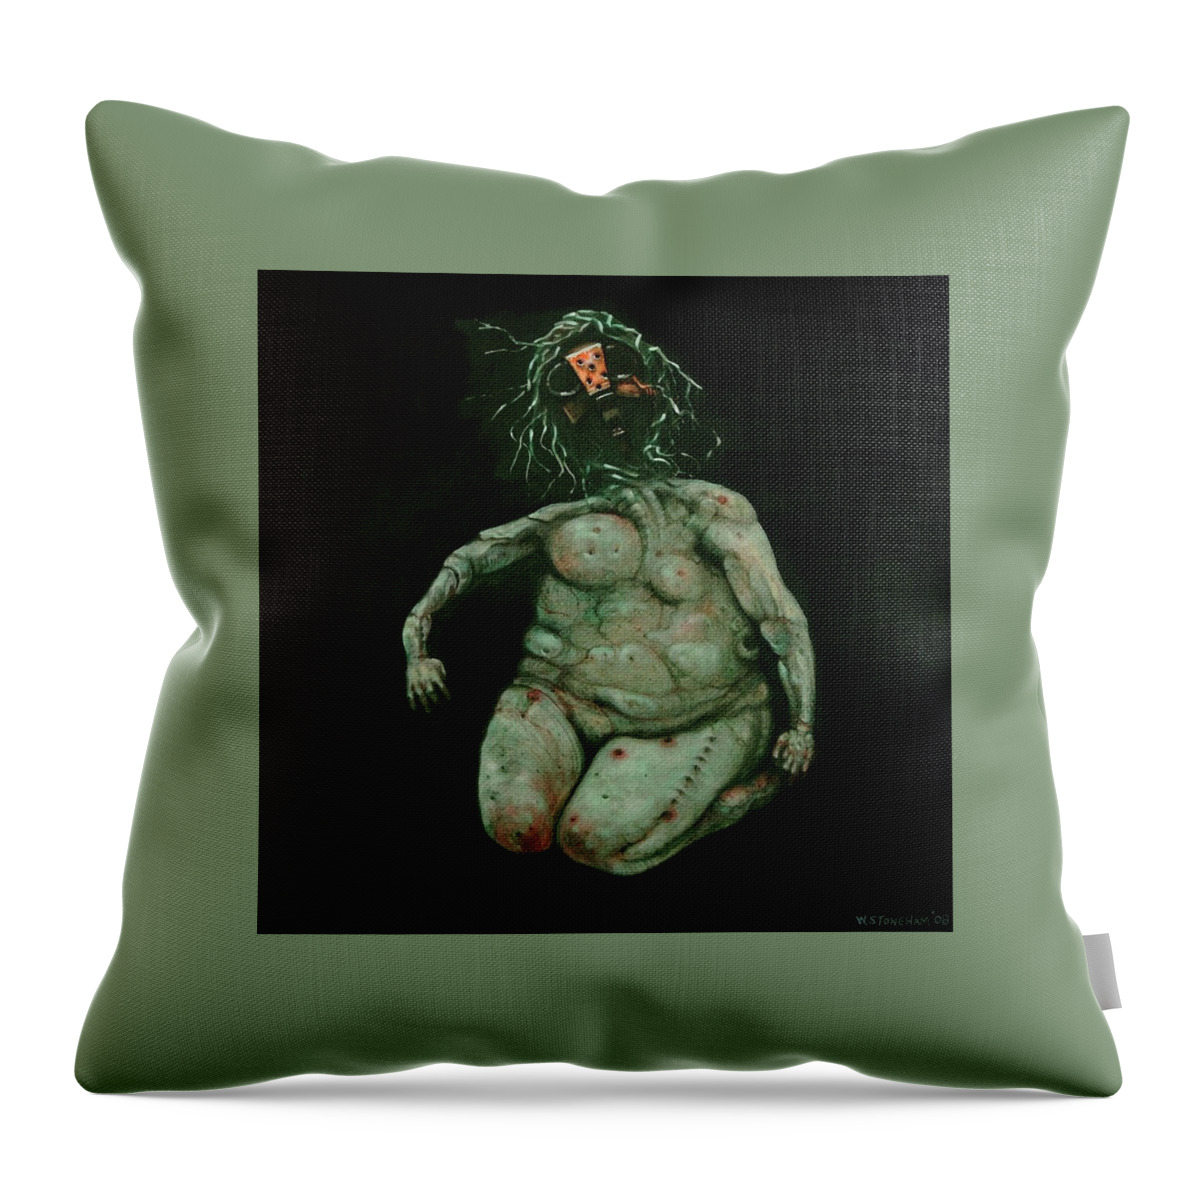 Nightmare Throw Pillow featuring the painting Complications by William Stoneham